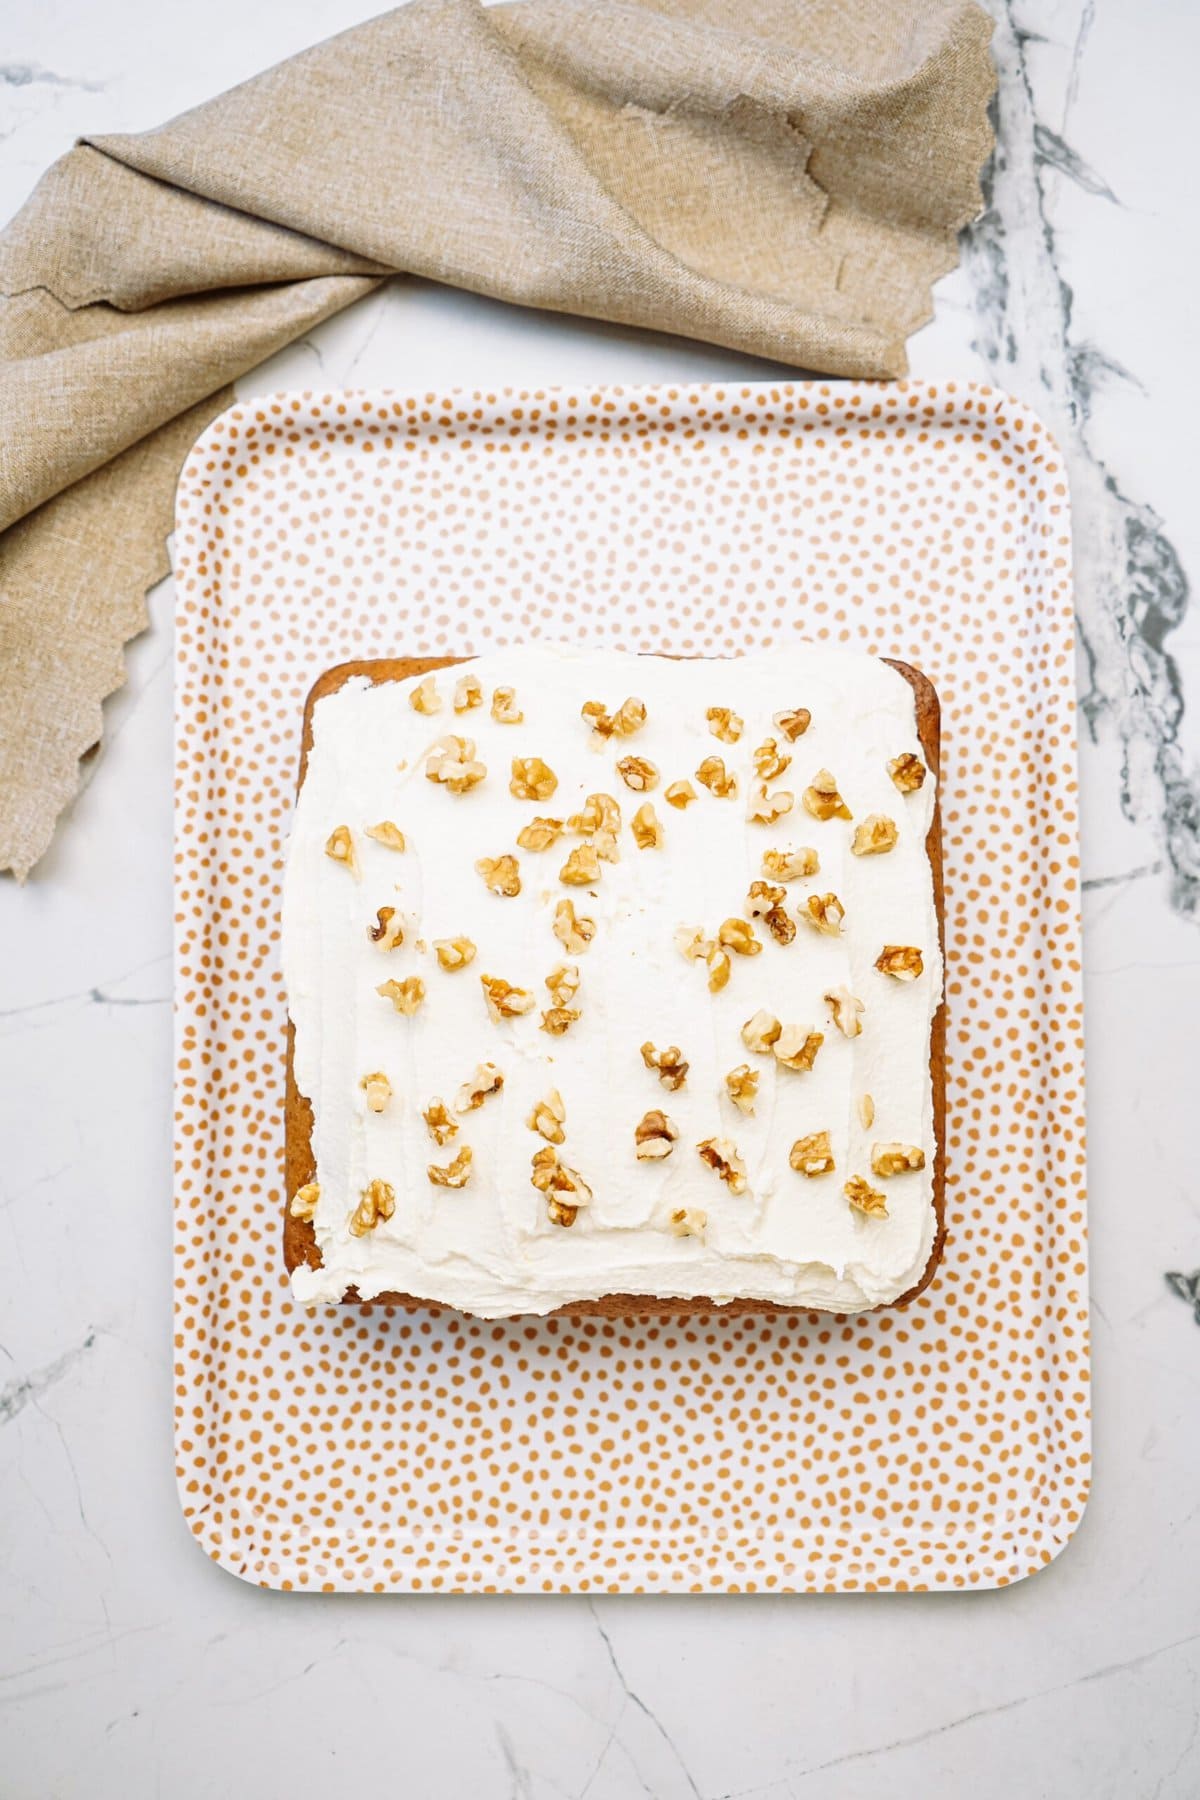 banana cake on a cutting board with walnuts sprinkled on top 